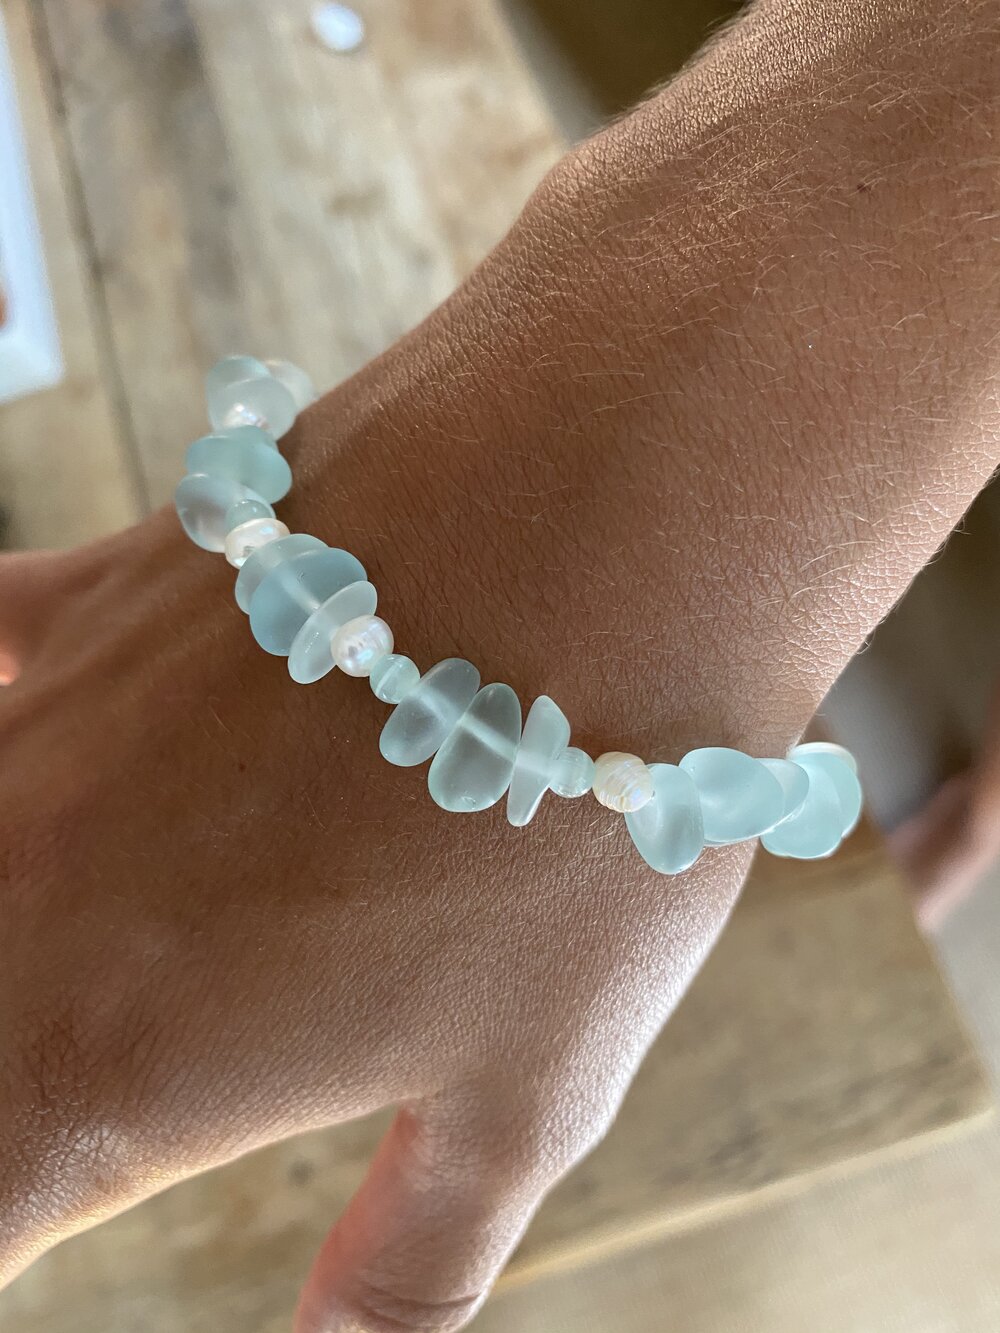 Sea Glass, Aqua Cat Eye and Freshwater Pearl Sterling Silver Bracelet —  Beads and Boards